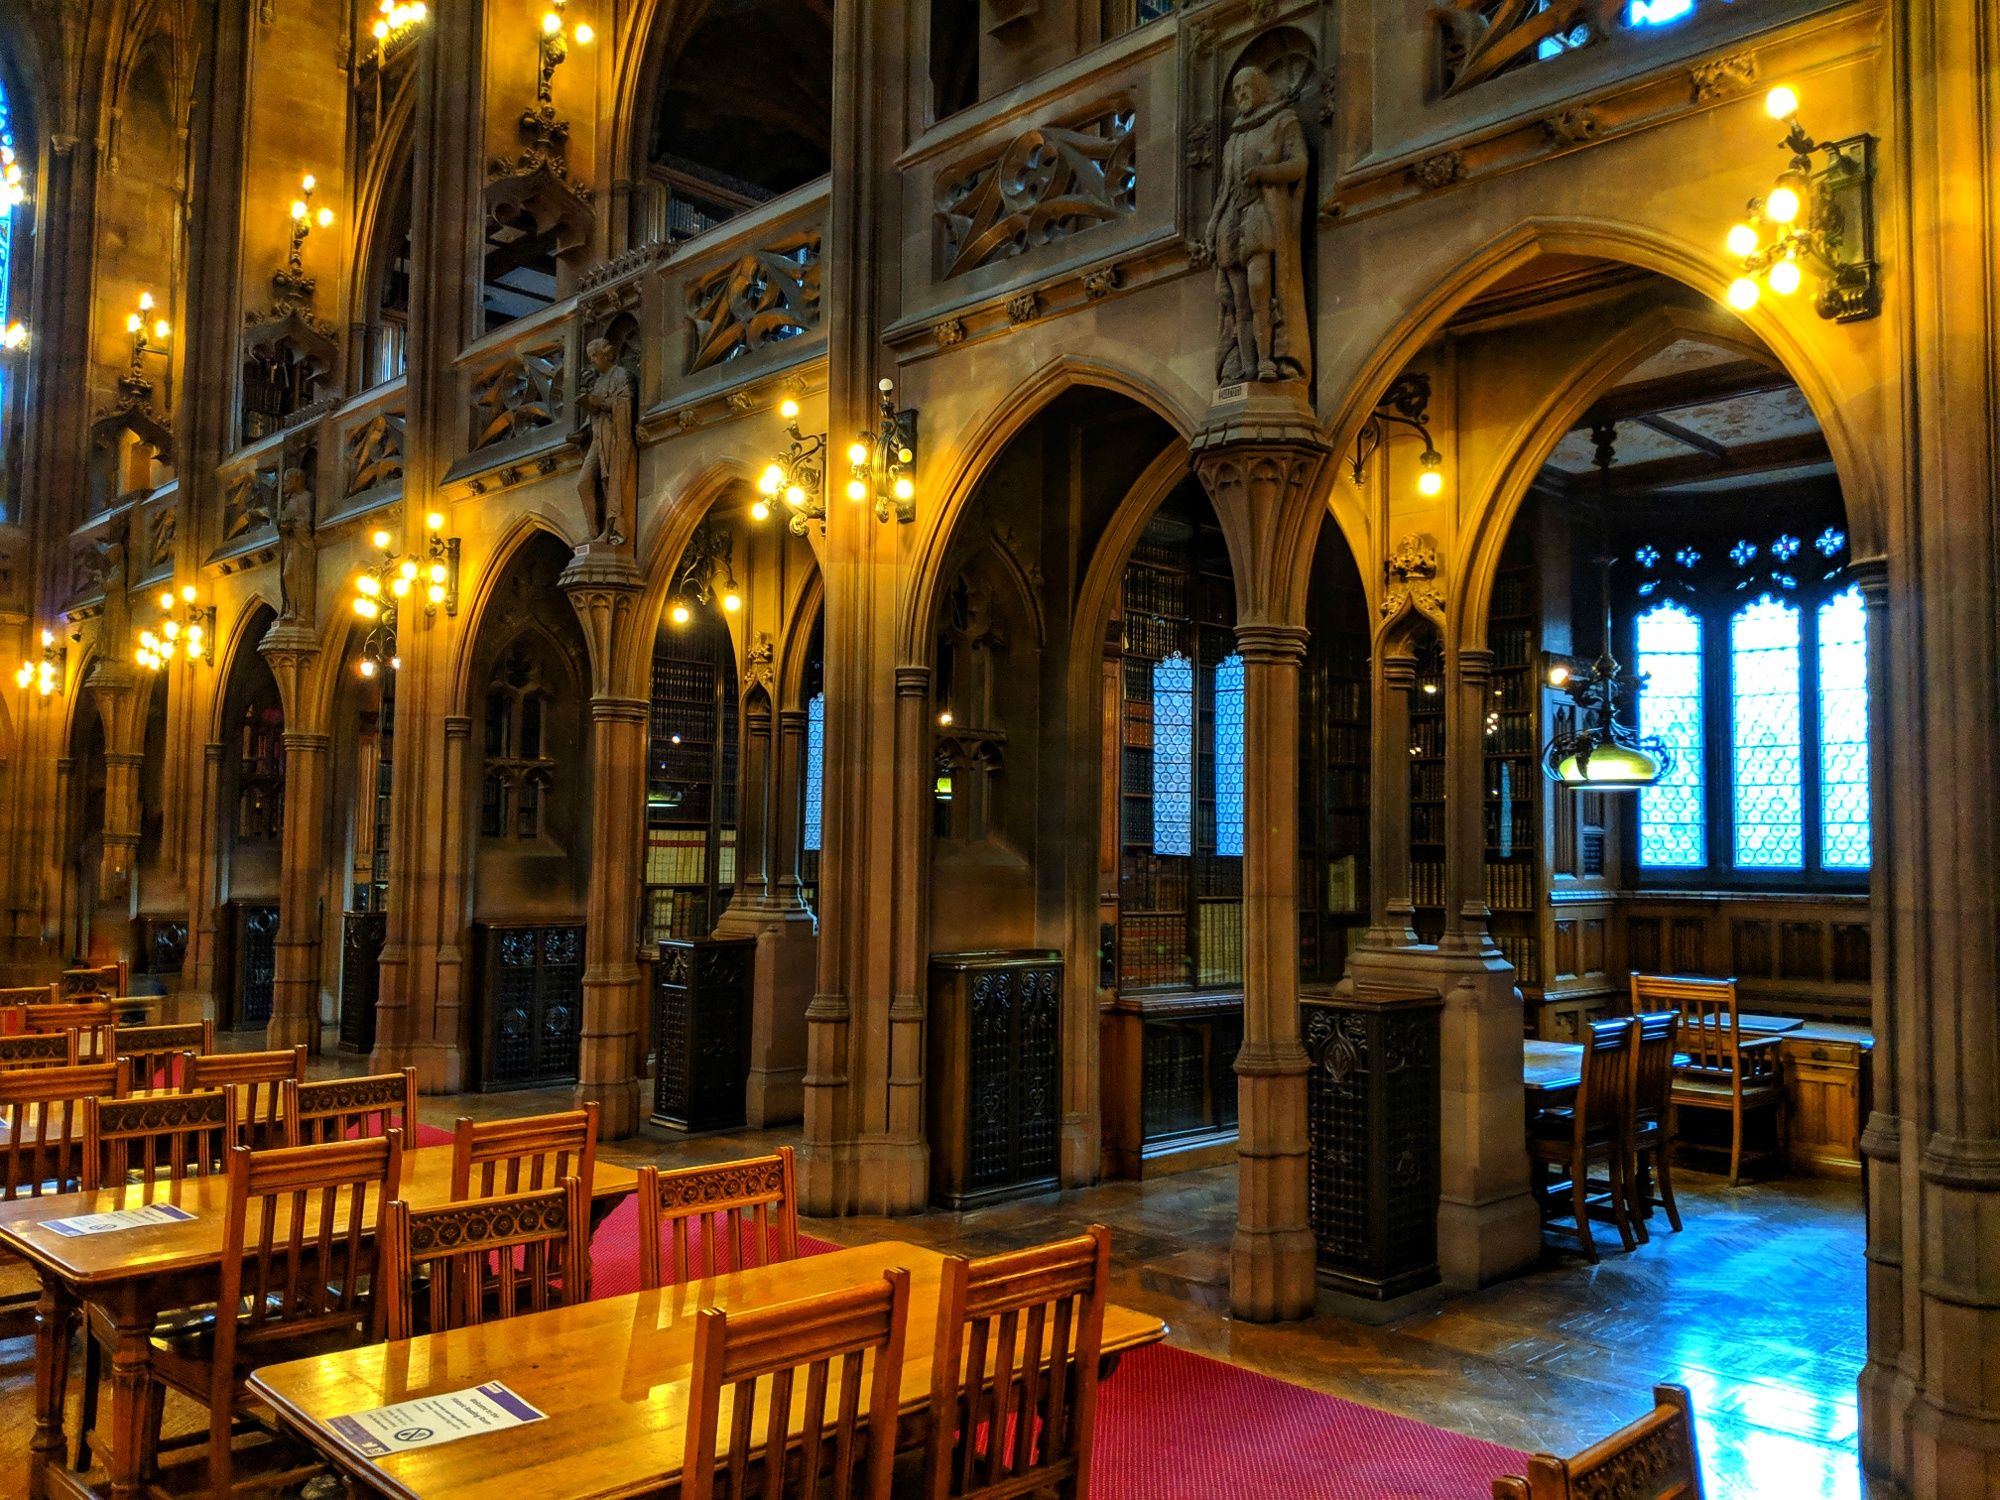 Sit in the reading room